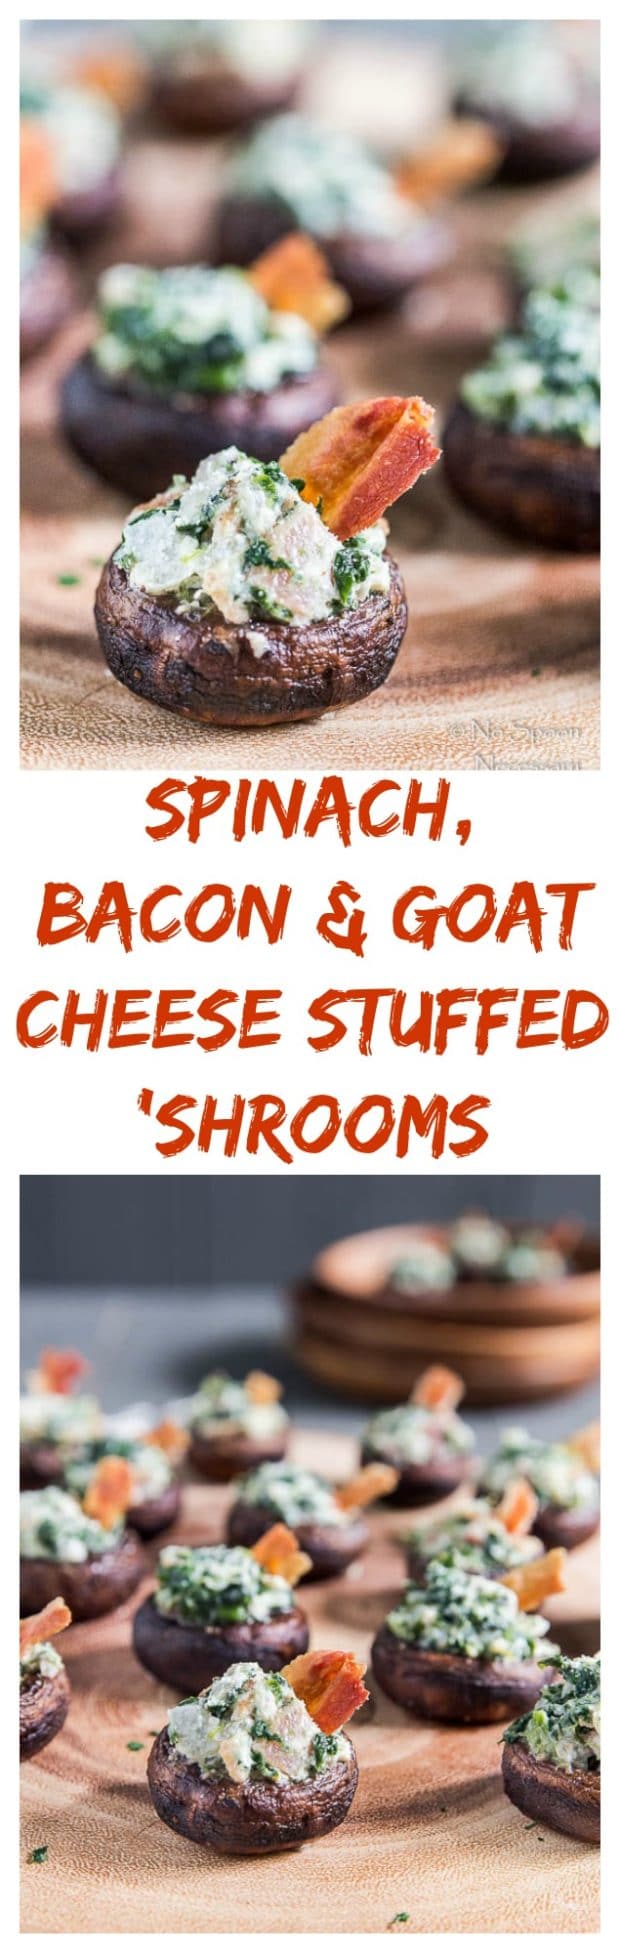 Spinach, Bacon & Goat Cheese Stuffed Mushrooms 7